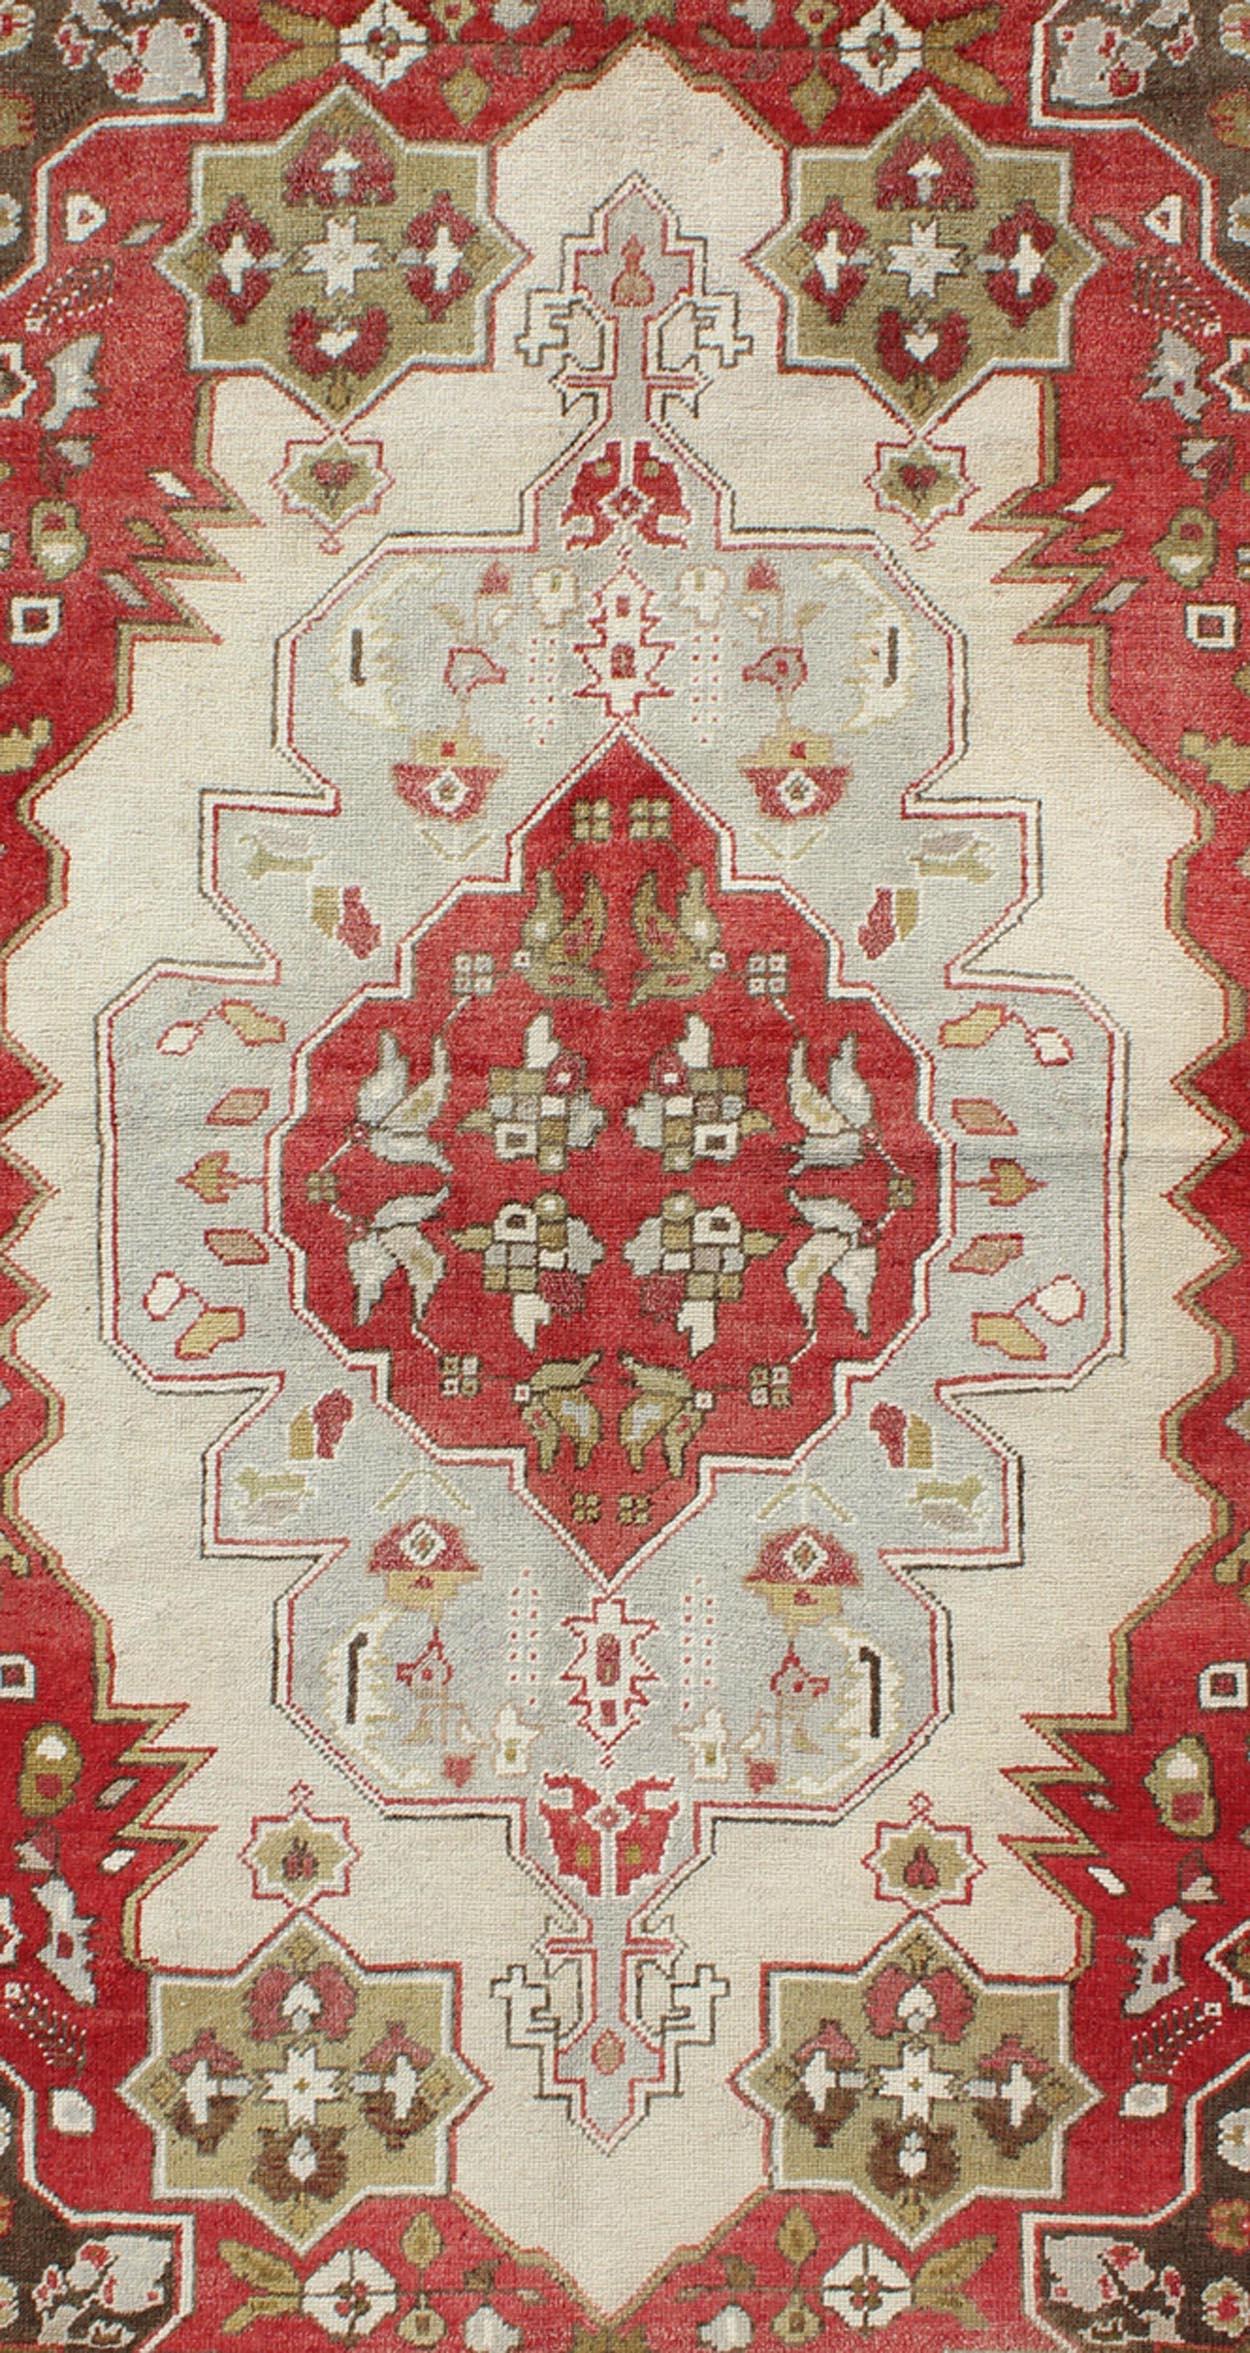 Measures: 4'4 x 7'9

This vintage Turkish Oushak rug features an intricate geometric medallion design. The central medallion is surrounded by multi-layers in the field. The various shades of red, green, pale blue, off white and light brown blend